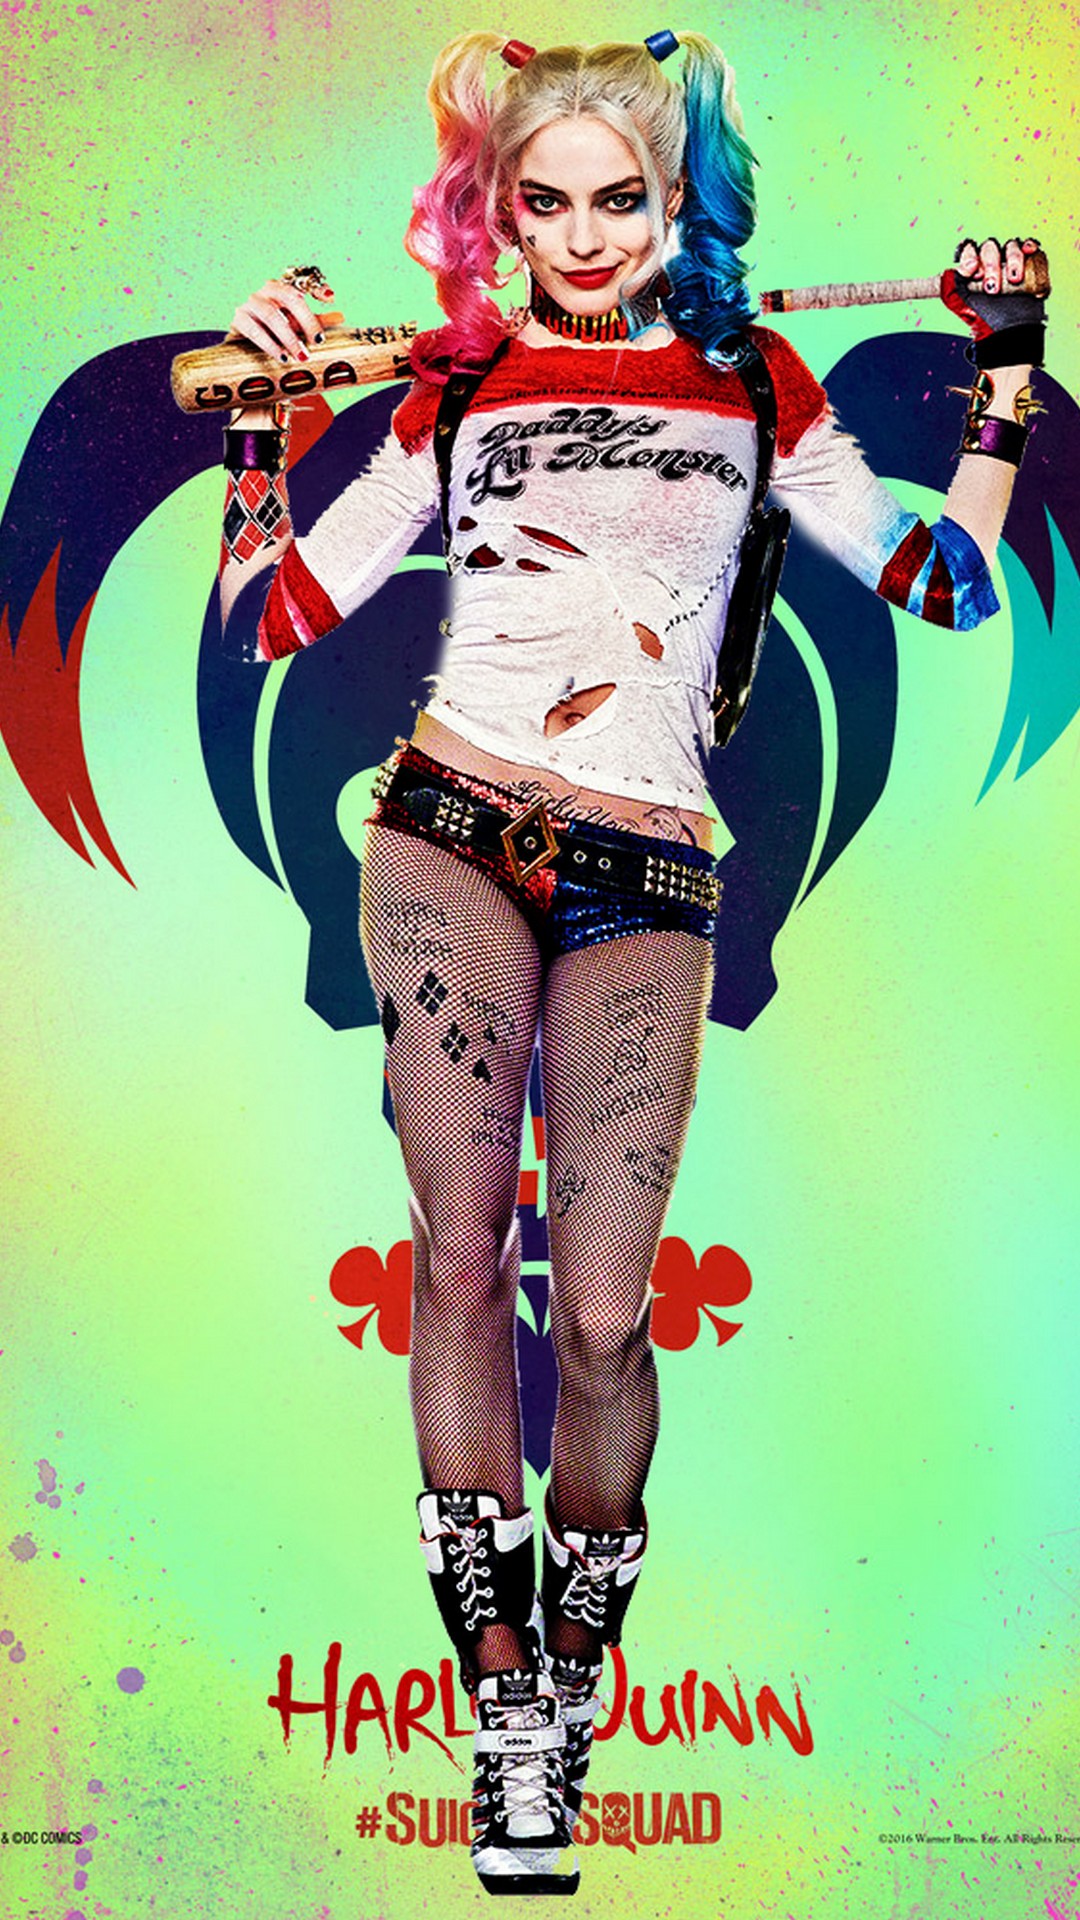 iPhone Wallpaper Harley Quinn Movie with resolution 1080X1920 pixel. You can make this wallpaper for your iPhone 5, 6, 7, 8, X backgrounds, Mobile Screensaver, or iPad Lock Screen